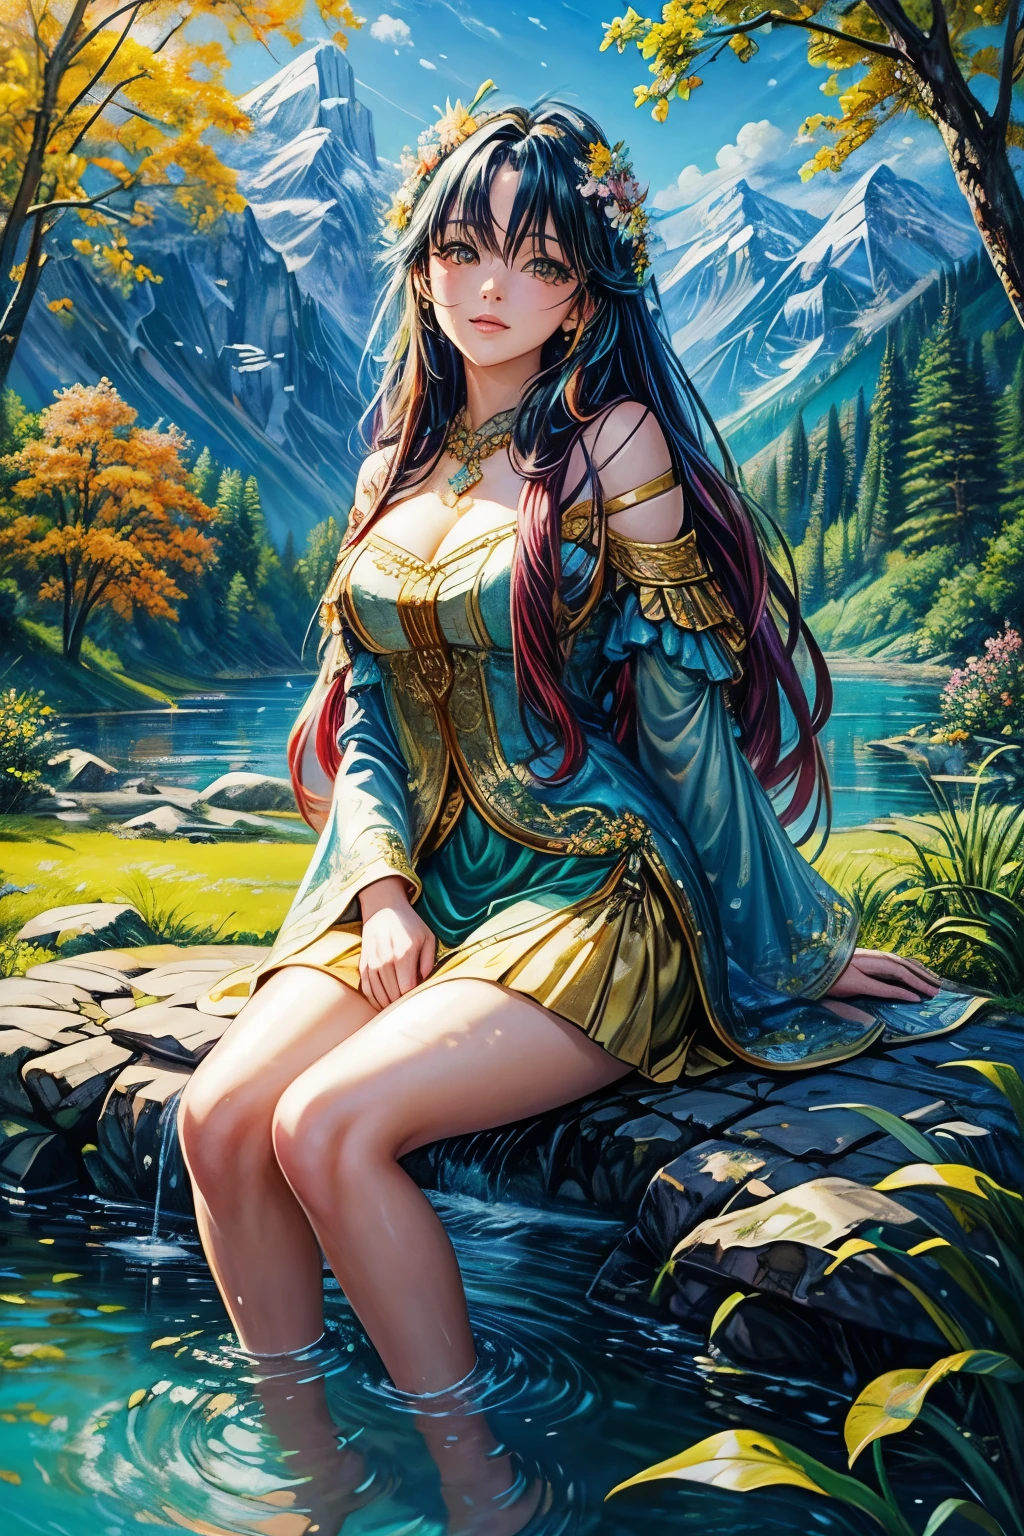 (detailed oil painting:1.2),vivid colors,vibrant scenery,serene atmosphere,colorful costume,flowing hair,, sparkling river, lush trees, peaceful meadows,delicate flowers,soft sunlight,playful breeze,majestic mountains,clear blue sky,realistic details,photorealistic style.